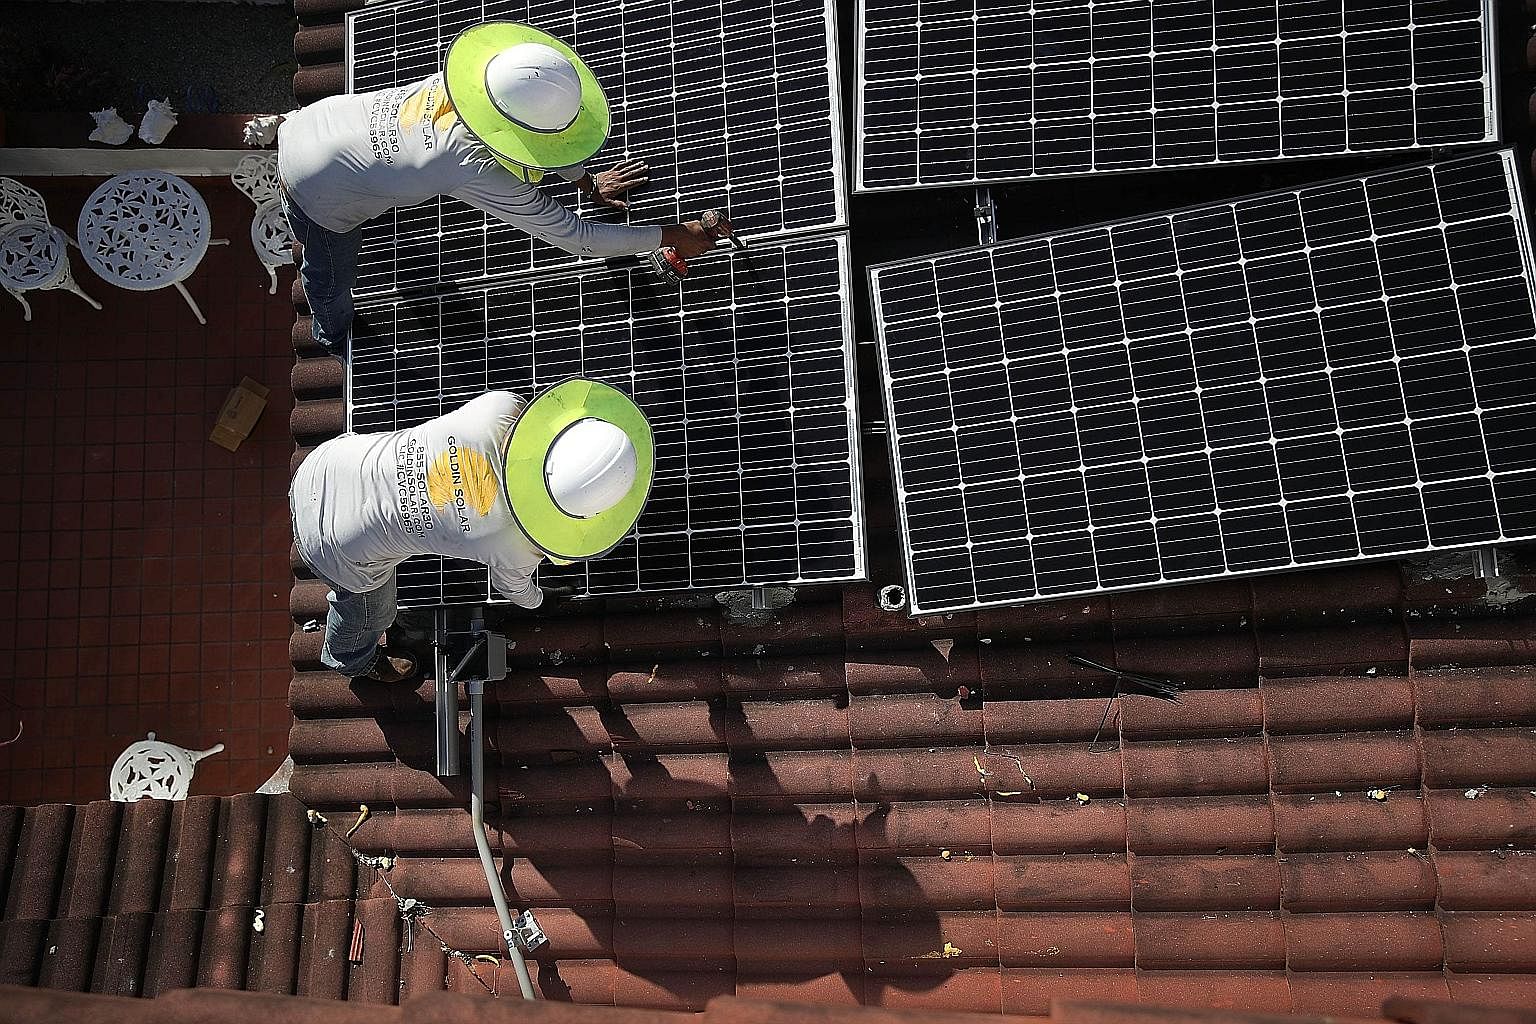 Solar panels being installed on the roof of a home in Florida. The United States has recently taken several trade actions against China, including steep import tariffs on solar products.